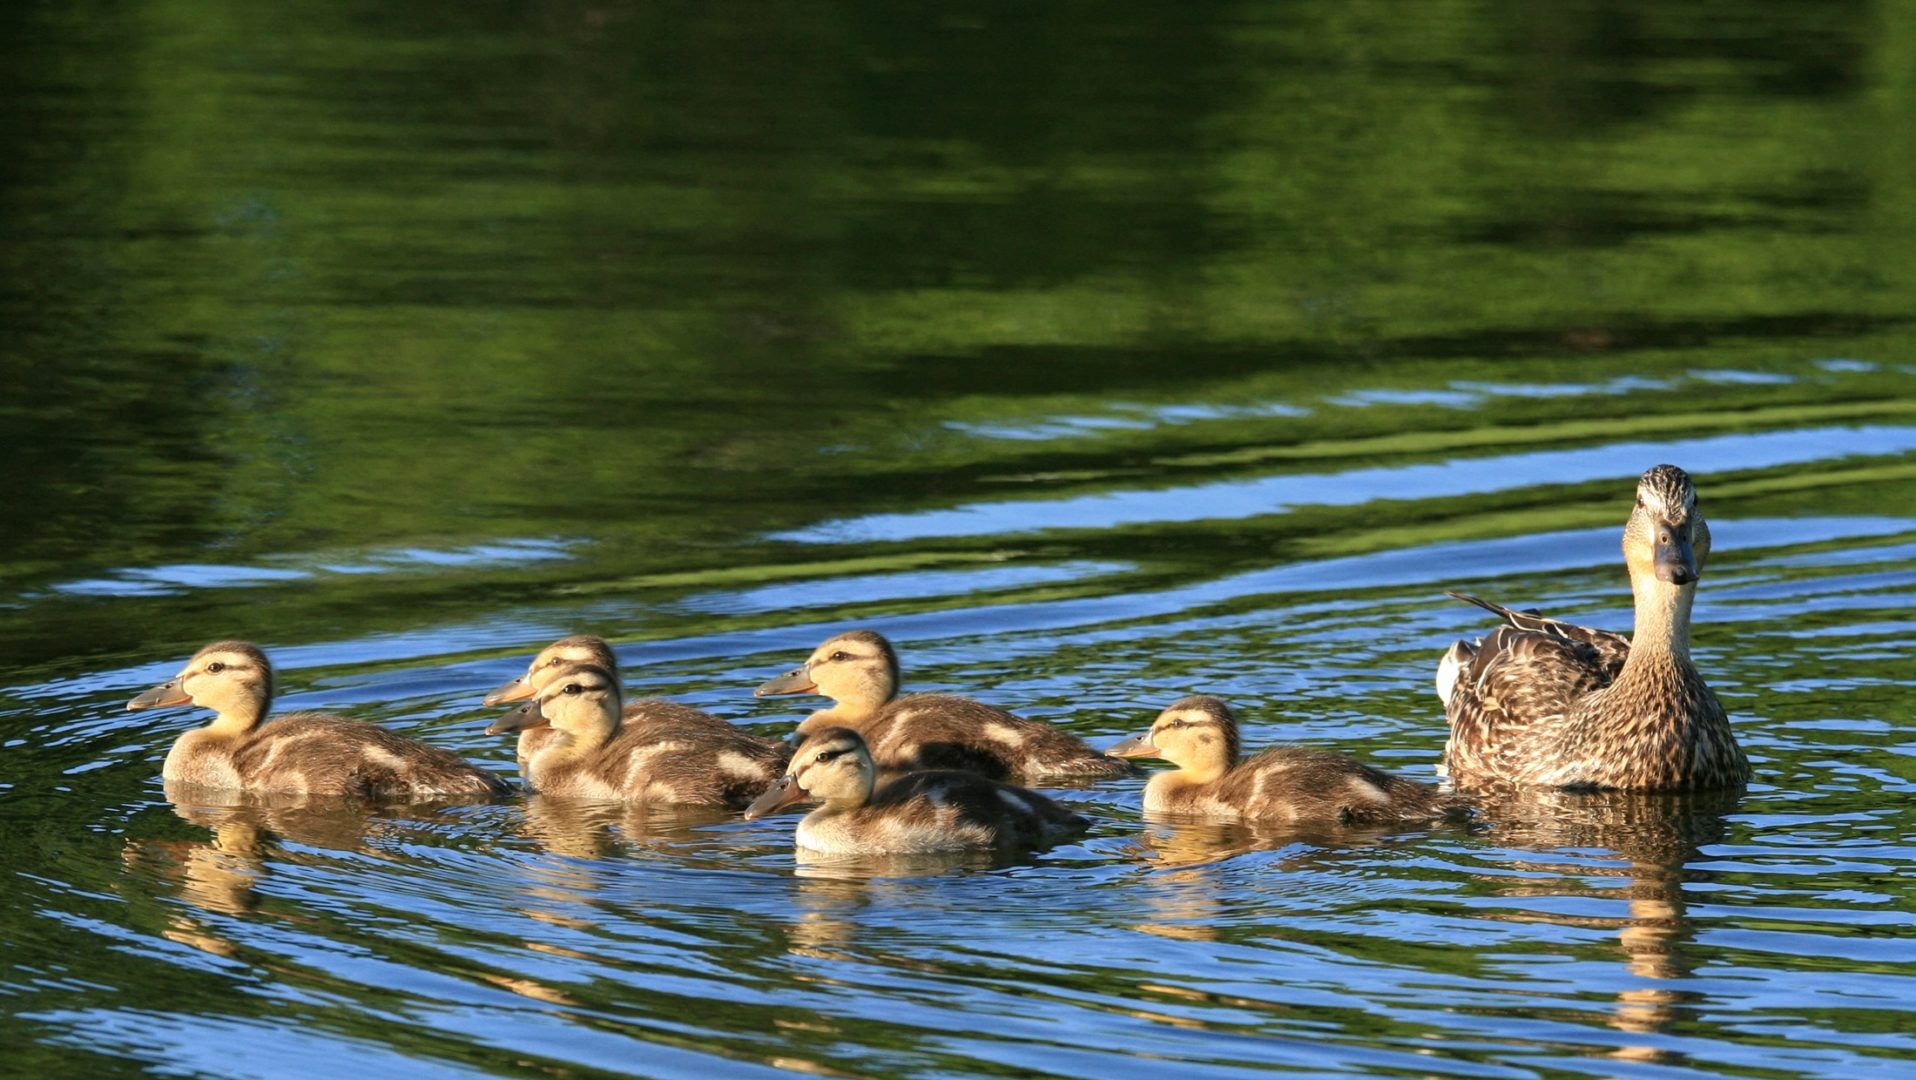 an adult duck with a group of baby ducks swim in the water of a lake.